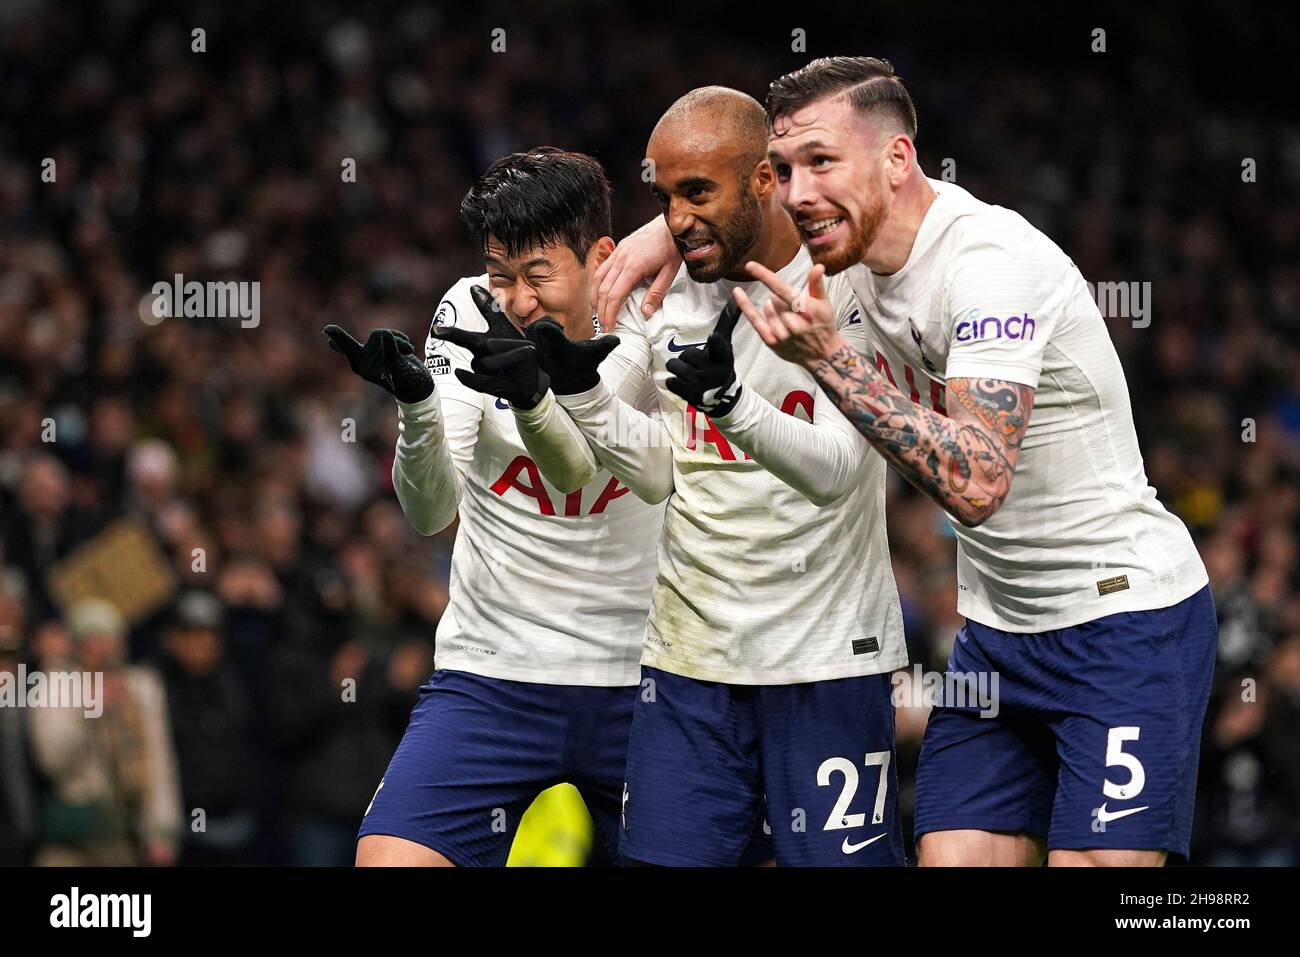 Tottenham Hotspur's Son Heung-min (left) celebrates scoring their side's third goal of the game with Tottenham Hotspur's Lucas Moura (centre) and Tottenham Hotspur's Pierre-Emile Hojbjerg (right) during the Premier League match at Tottenham Hotspur Stadium, London. Picture date: Sunday December 5, 2021. Stock Photo